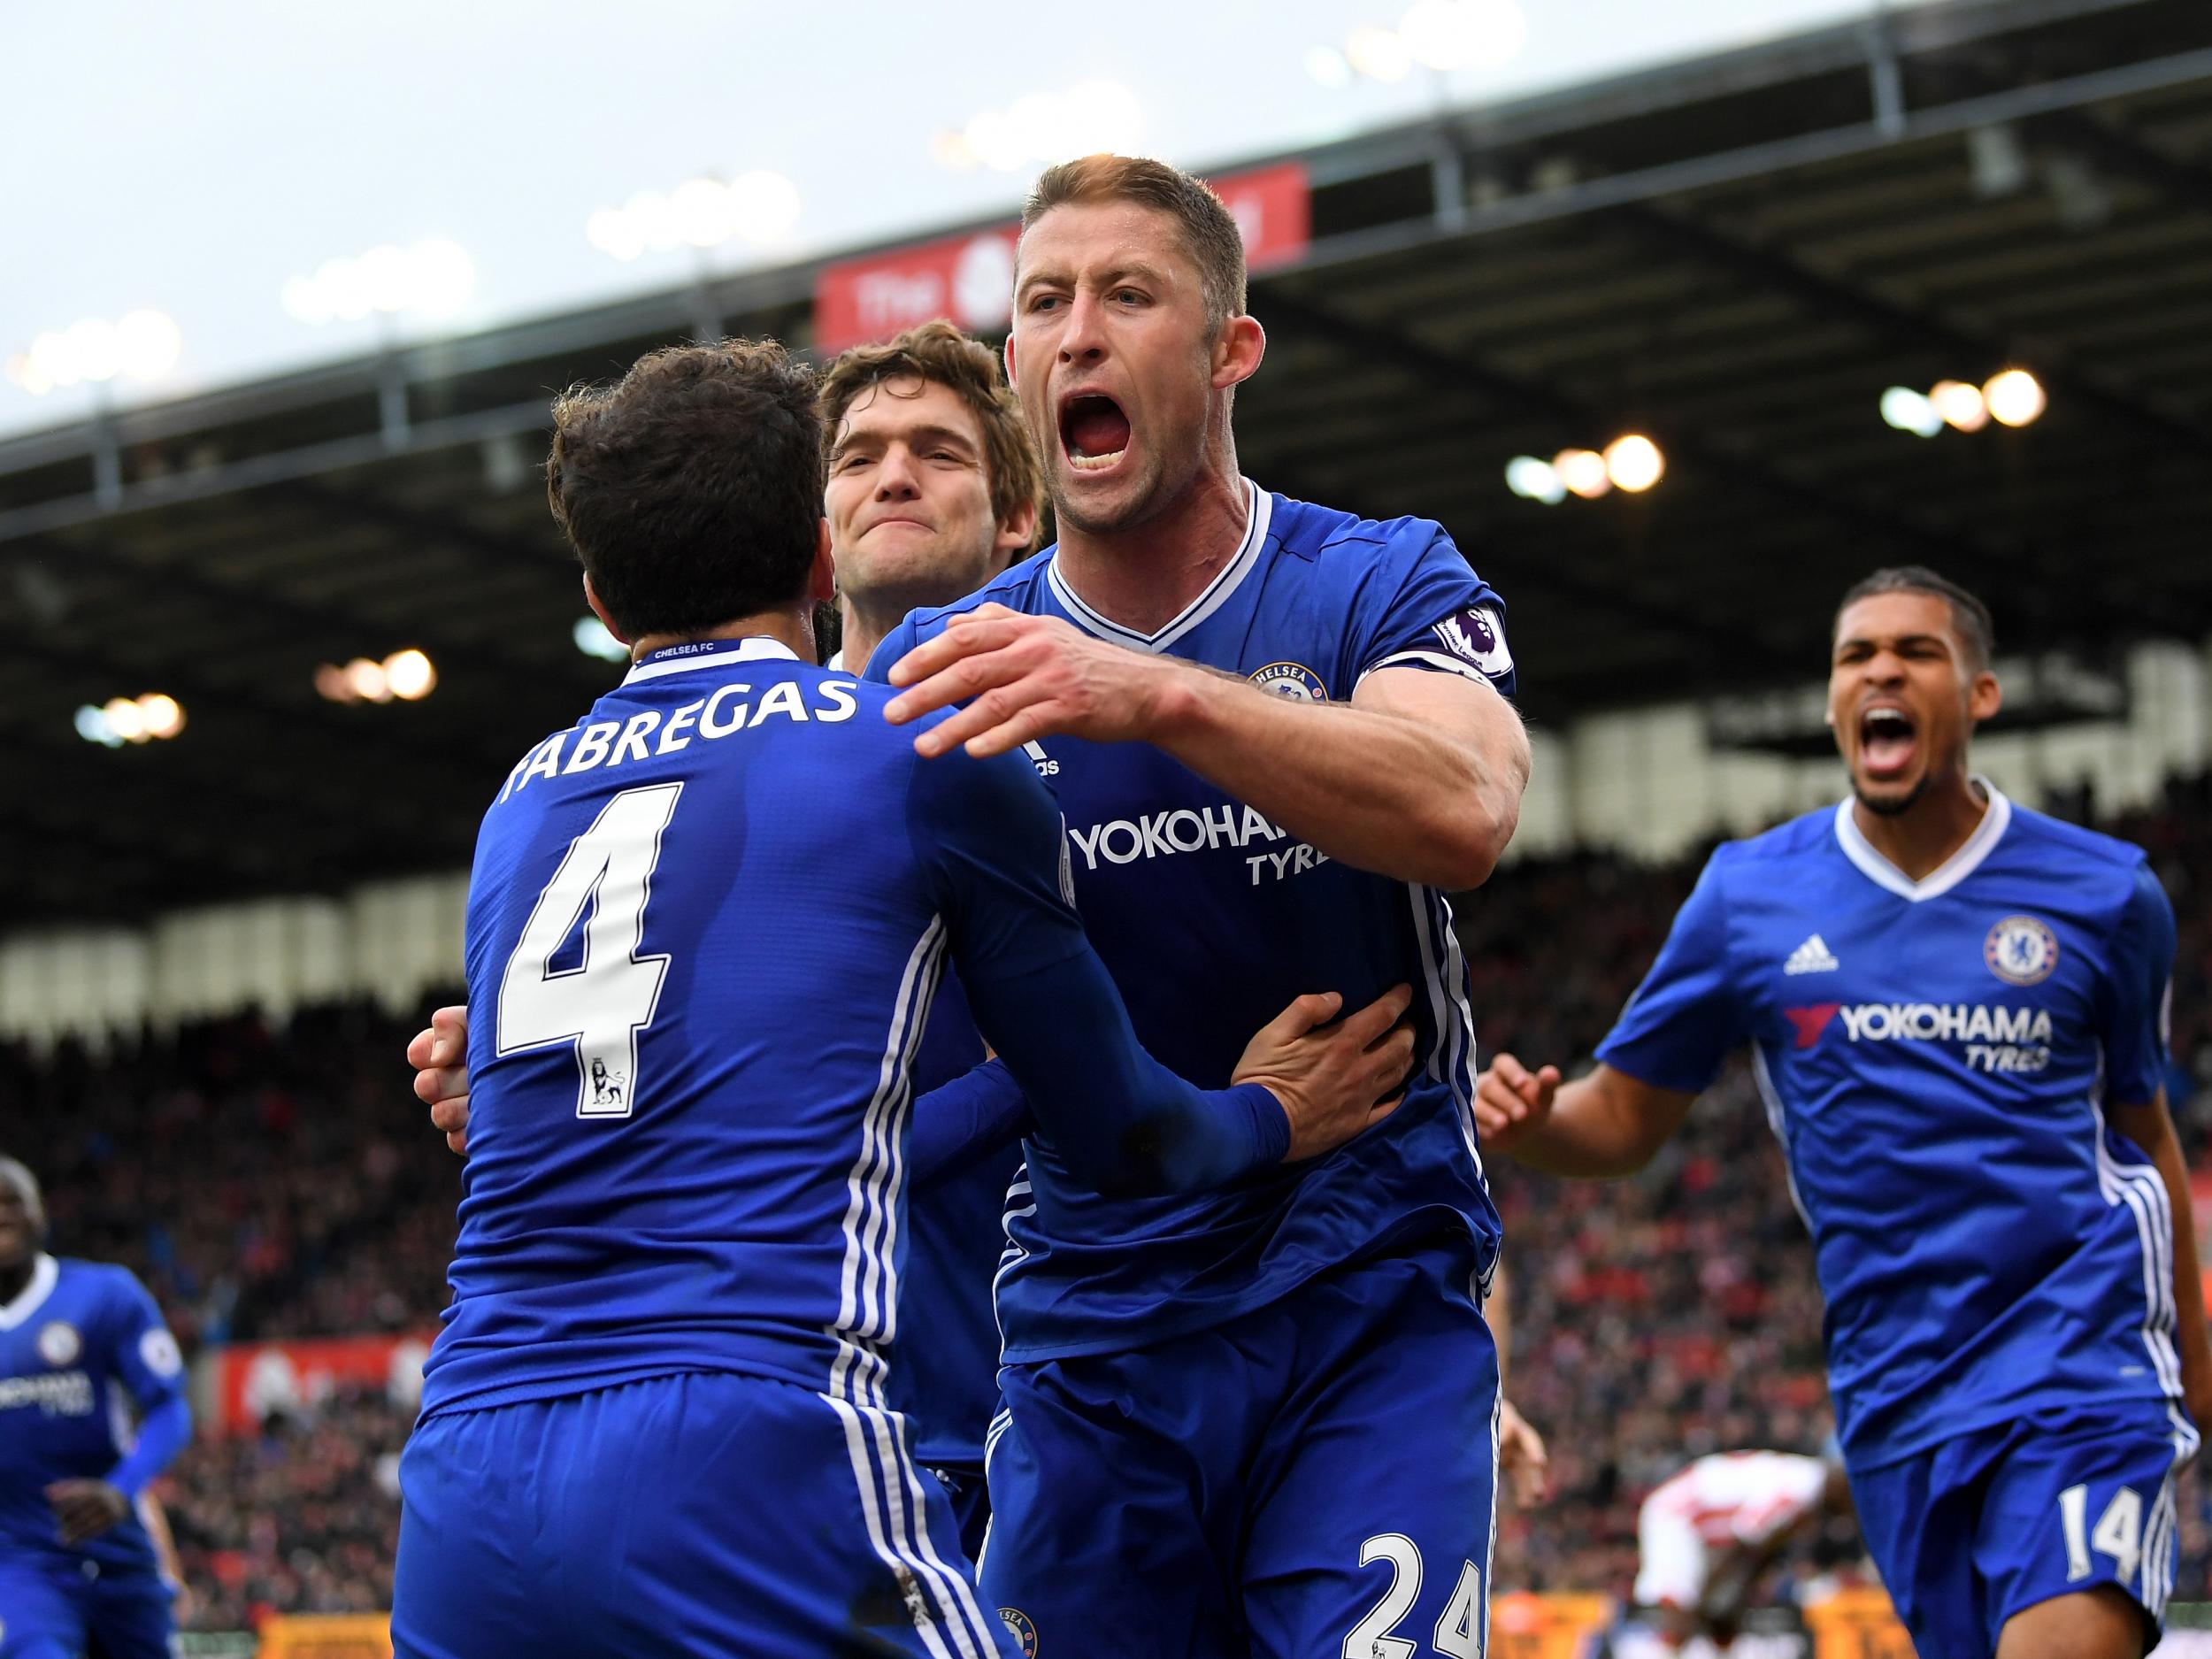 Chelsea's captain won them the match against a dogged Stoke